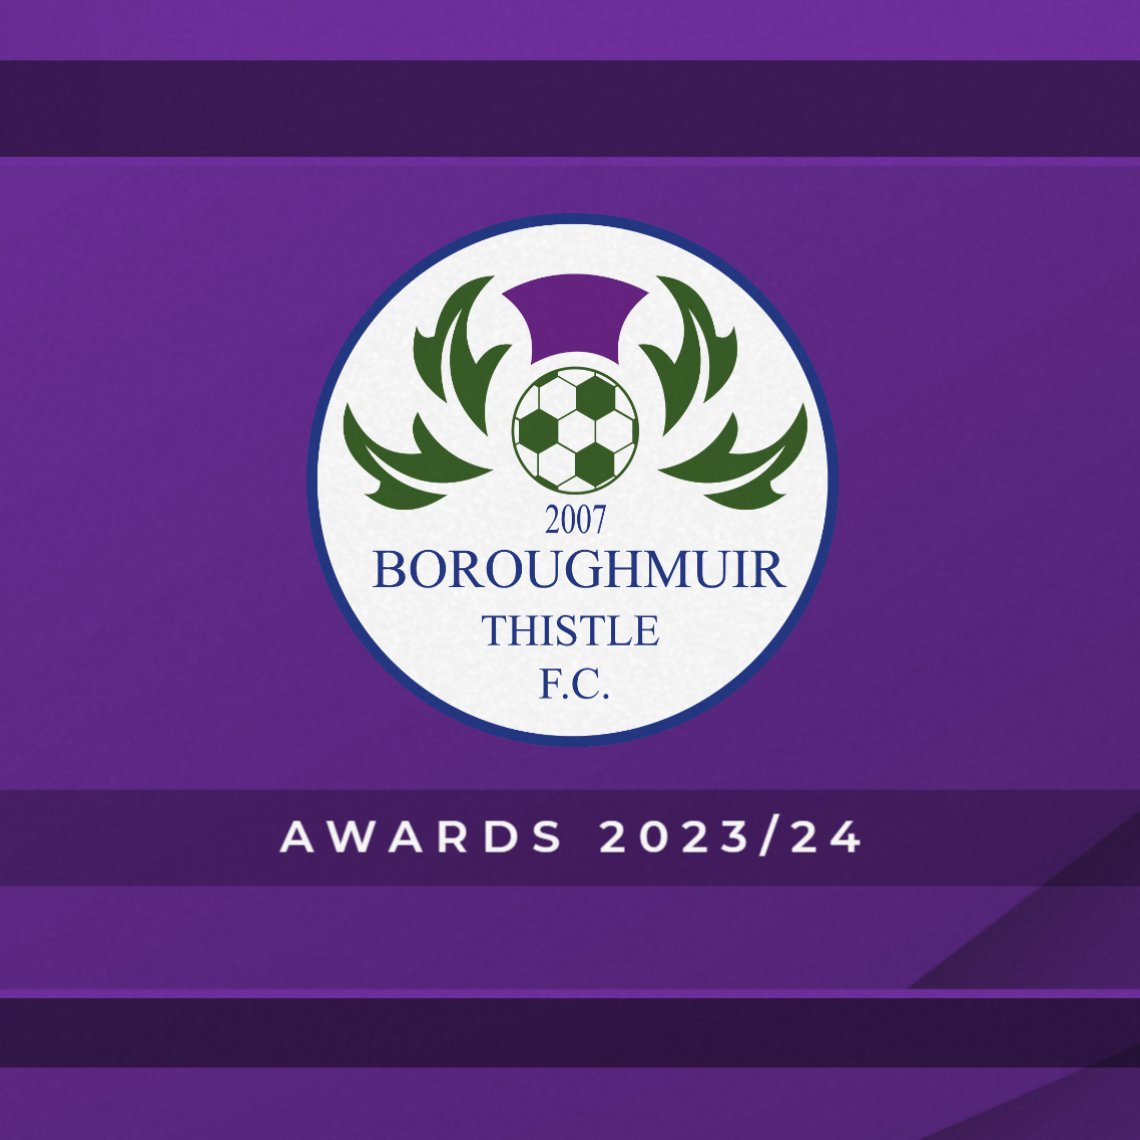 𝗕𝗧𝗙𝗖 𝗣𝗟𝗔𝗬𝗘𝗥 𝗢𝗙 𝗧𝗛𝗘 𝗬𝗘𝗔𝗥 ⭐ After the popularity of our recent polls, we are excited to announce a new end of season awards category: Supporters Player of the Year. Who do you think stood out in 2023/24? ➡️ Cast your vote by Thursday: bit.ly/btfcfanspoty23…